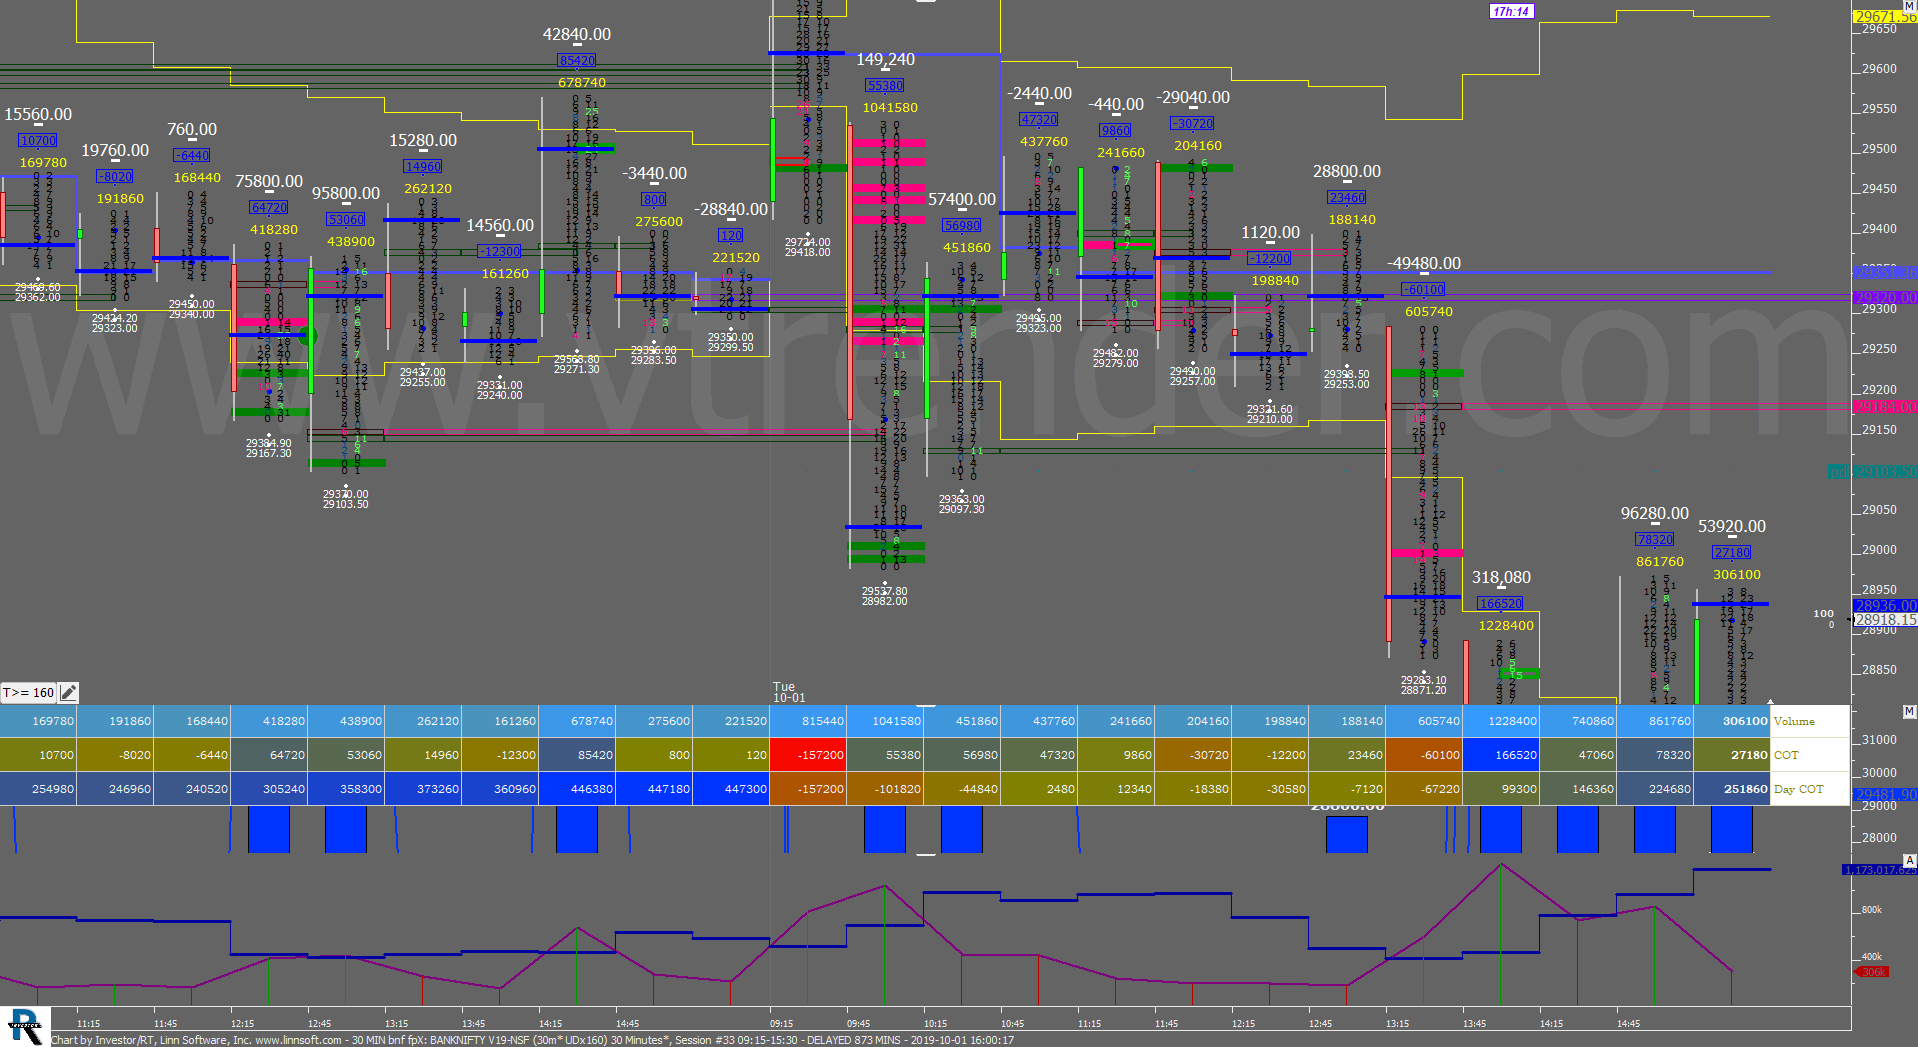 30 Min Bnf Fpx Order Flow Charts Dated 1St Oct Banknifty Futures, Day Trading, Intraday Trading, Intraday Trading Strategies, Nifty Futures, Order Flow Analysis, Support And Resistance, Trading Strategies, Volume Profile Trading